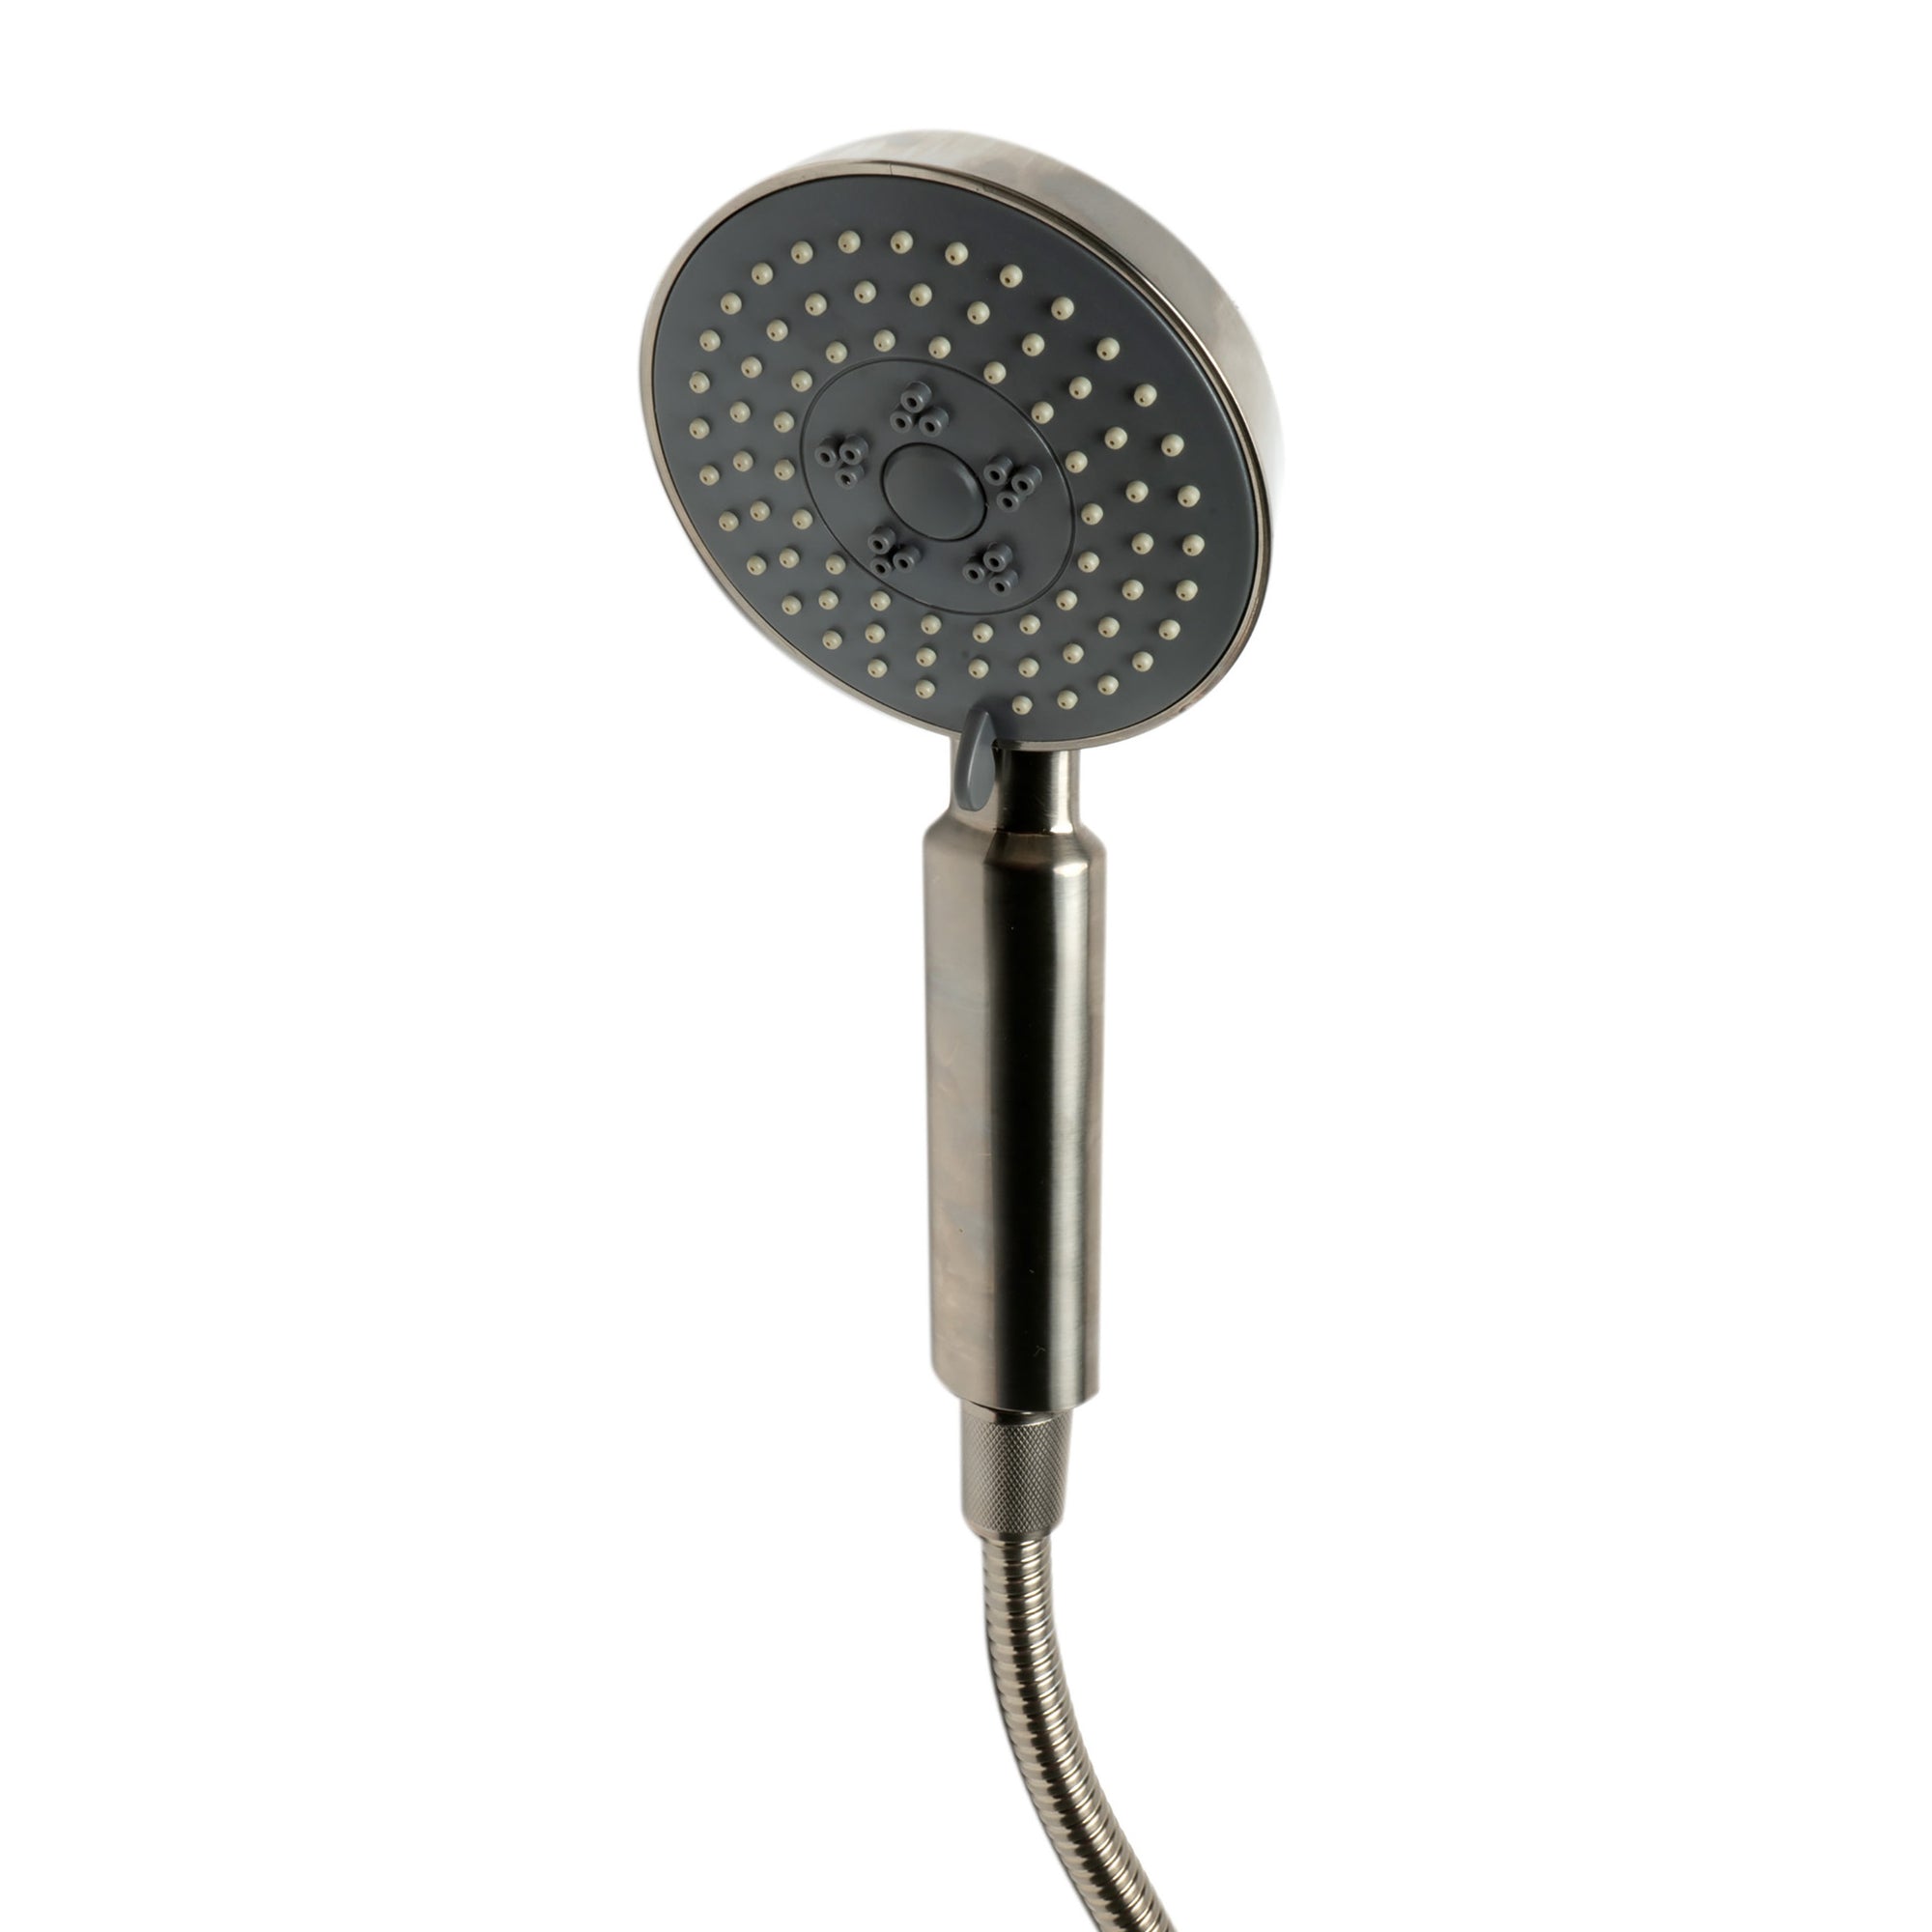 ALFI Round Style 2 Way Thermostatic Shower Set - Water Diverter, Temperature Control, On/Off Control, Rain Showerhead, Handheld Showerhead in Brushed Nickel - Wall Mounted - AB2545 - Vital Hydrotherapy